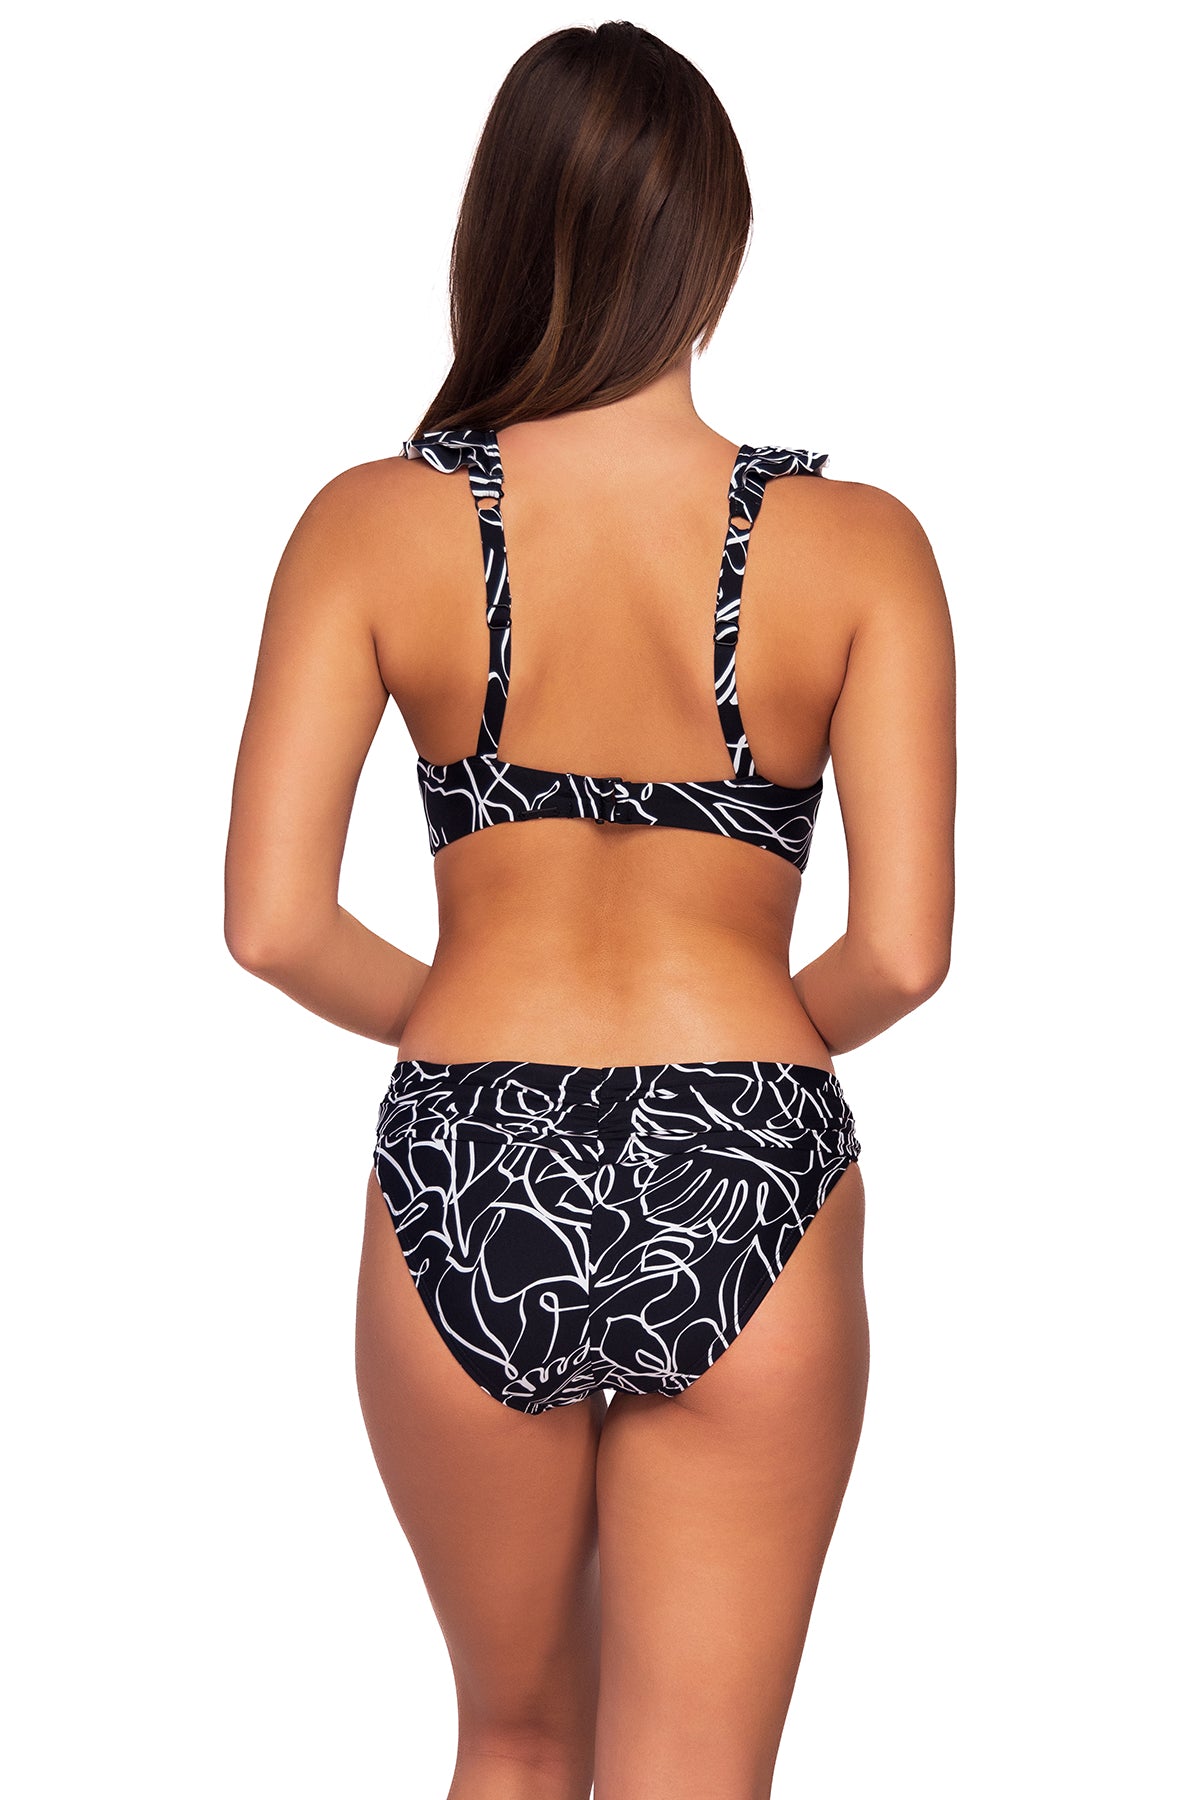 Back view of Sunsets Lost Palms Unforgettable Bottom with matching Willa Wireless bikini top